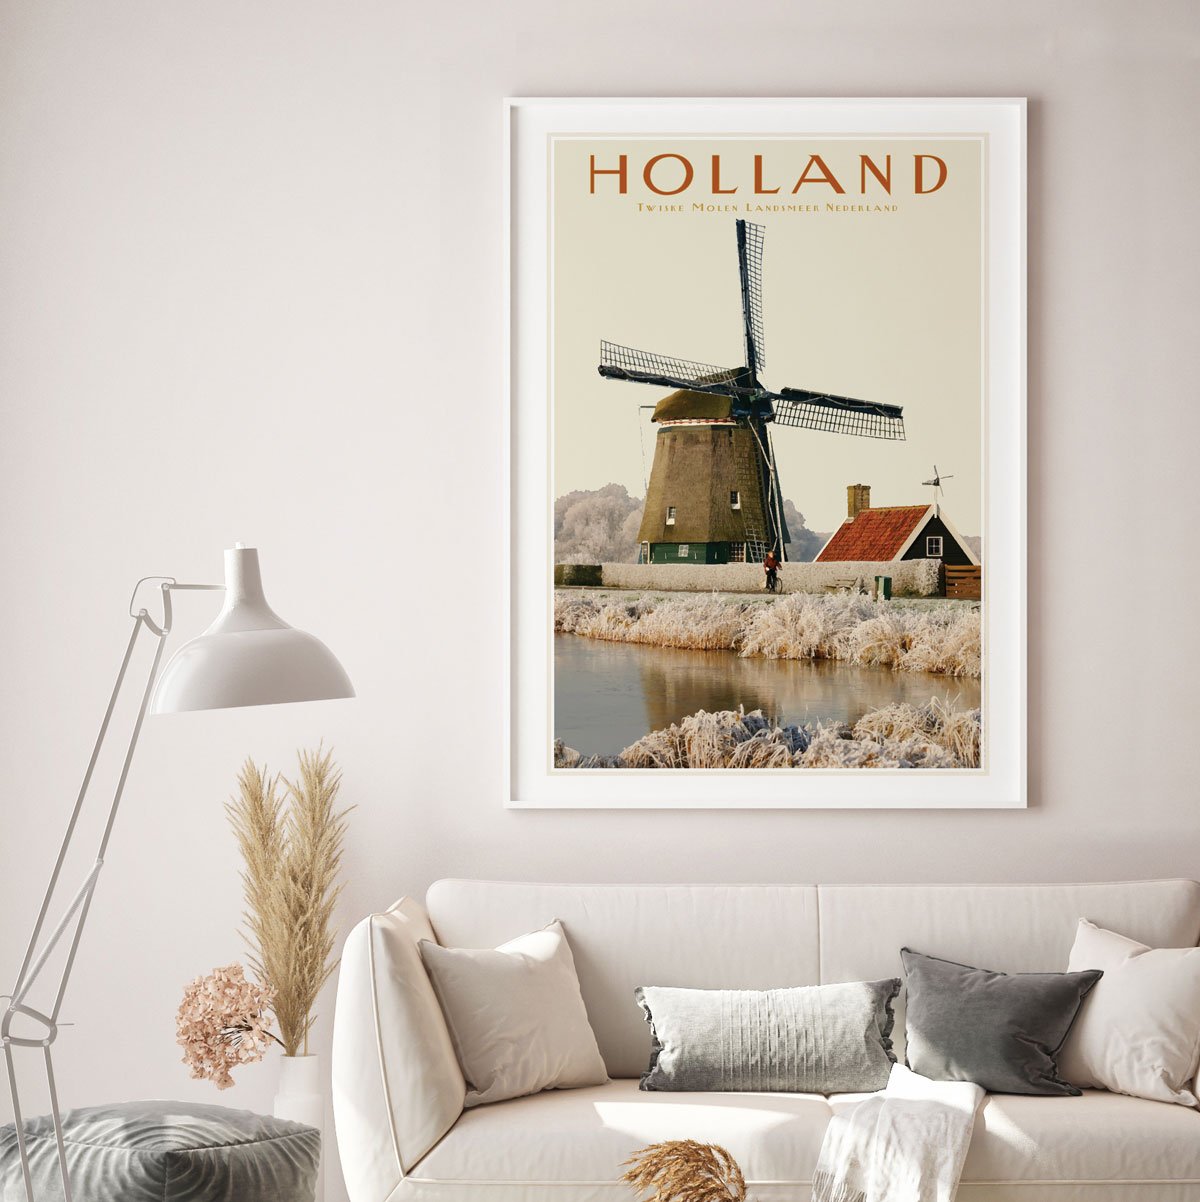 North Holland Windmill framed print. Vintage travel style poster. Original design by places we luv